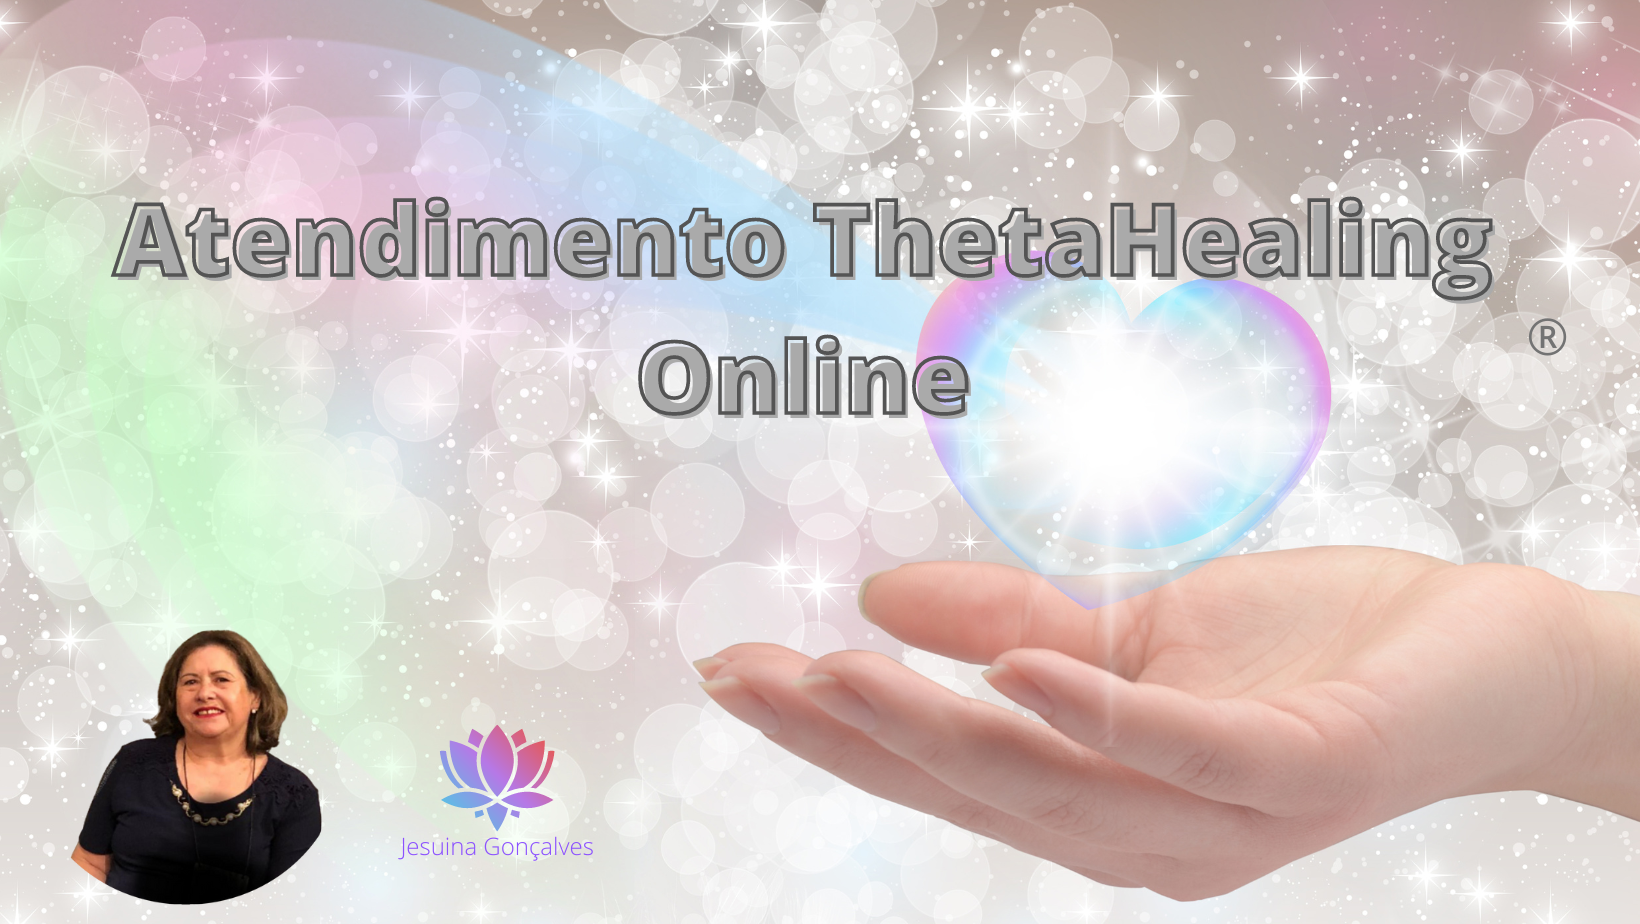 Atendimento com ThetaHealing® Online - Wise Tickets